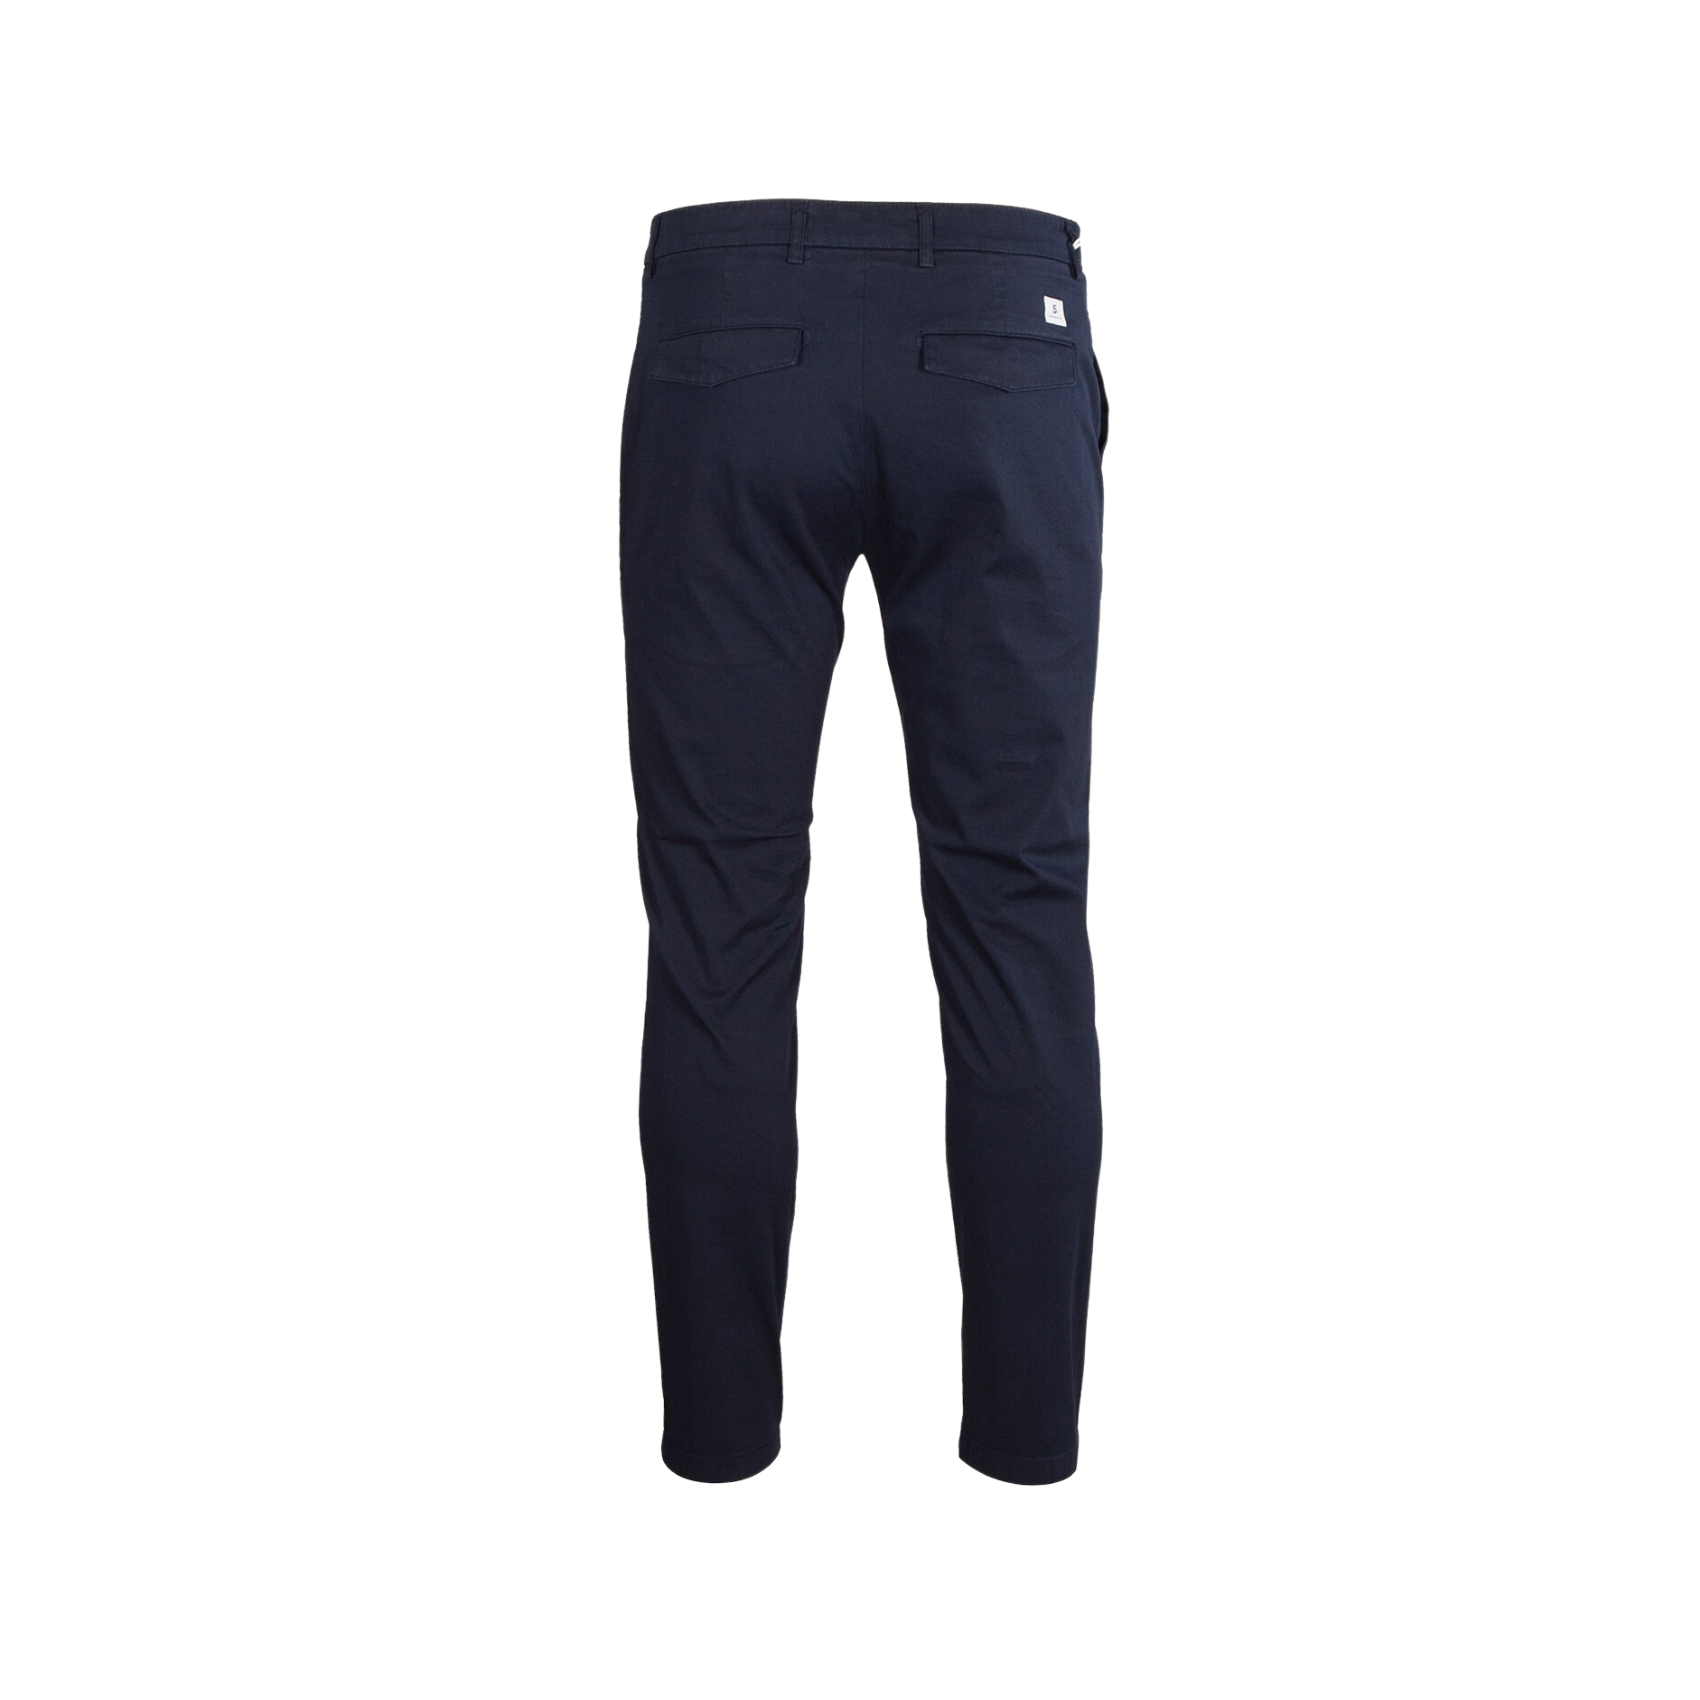 Prince Trousers Chinos - Navy